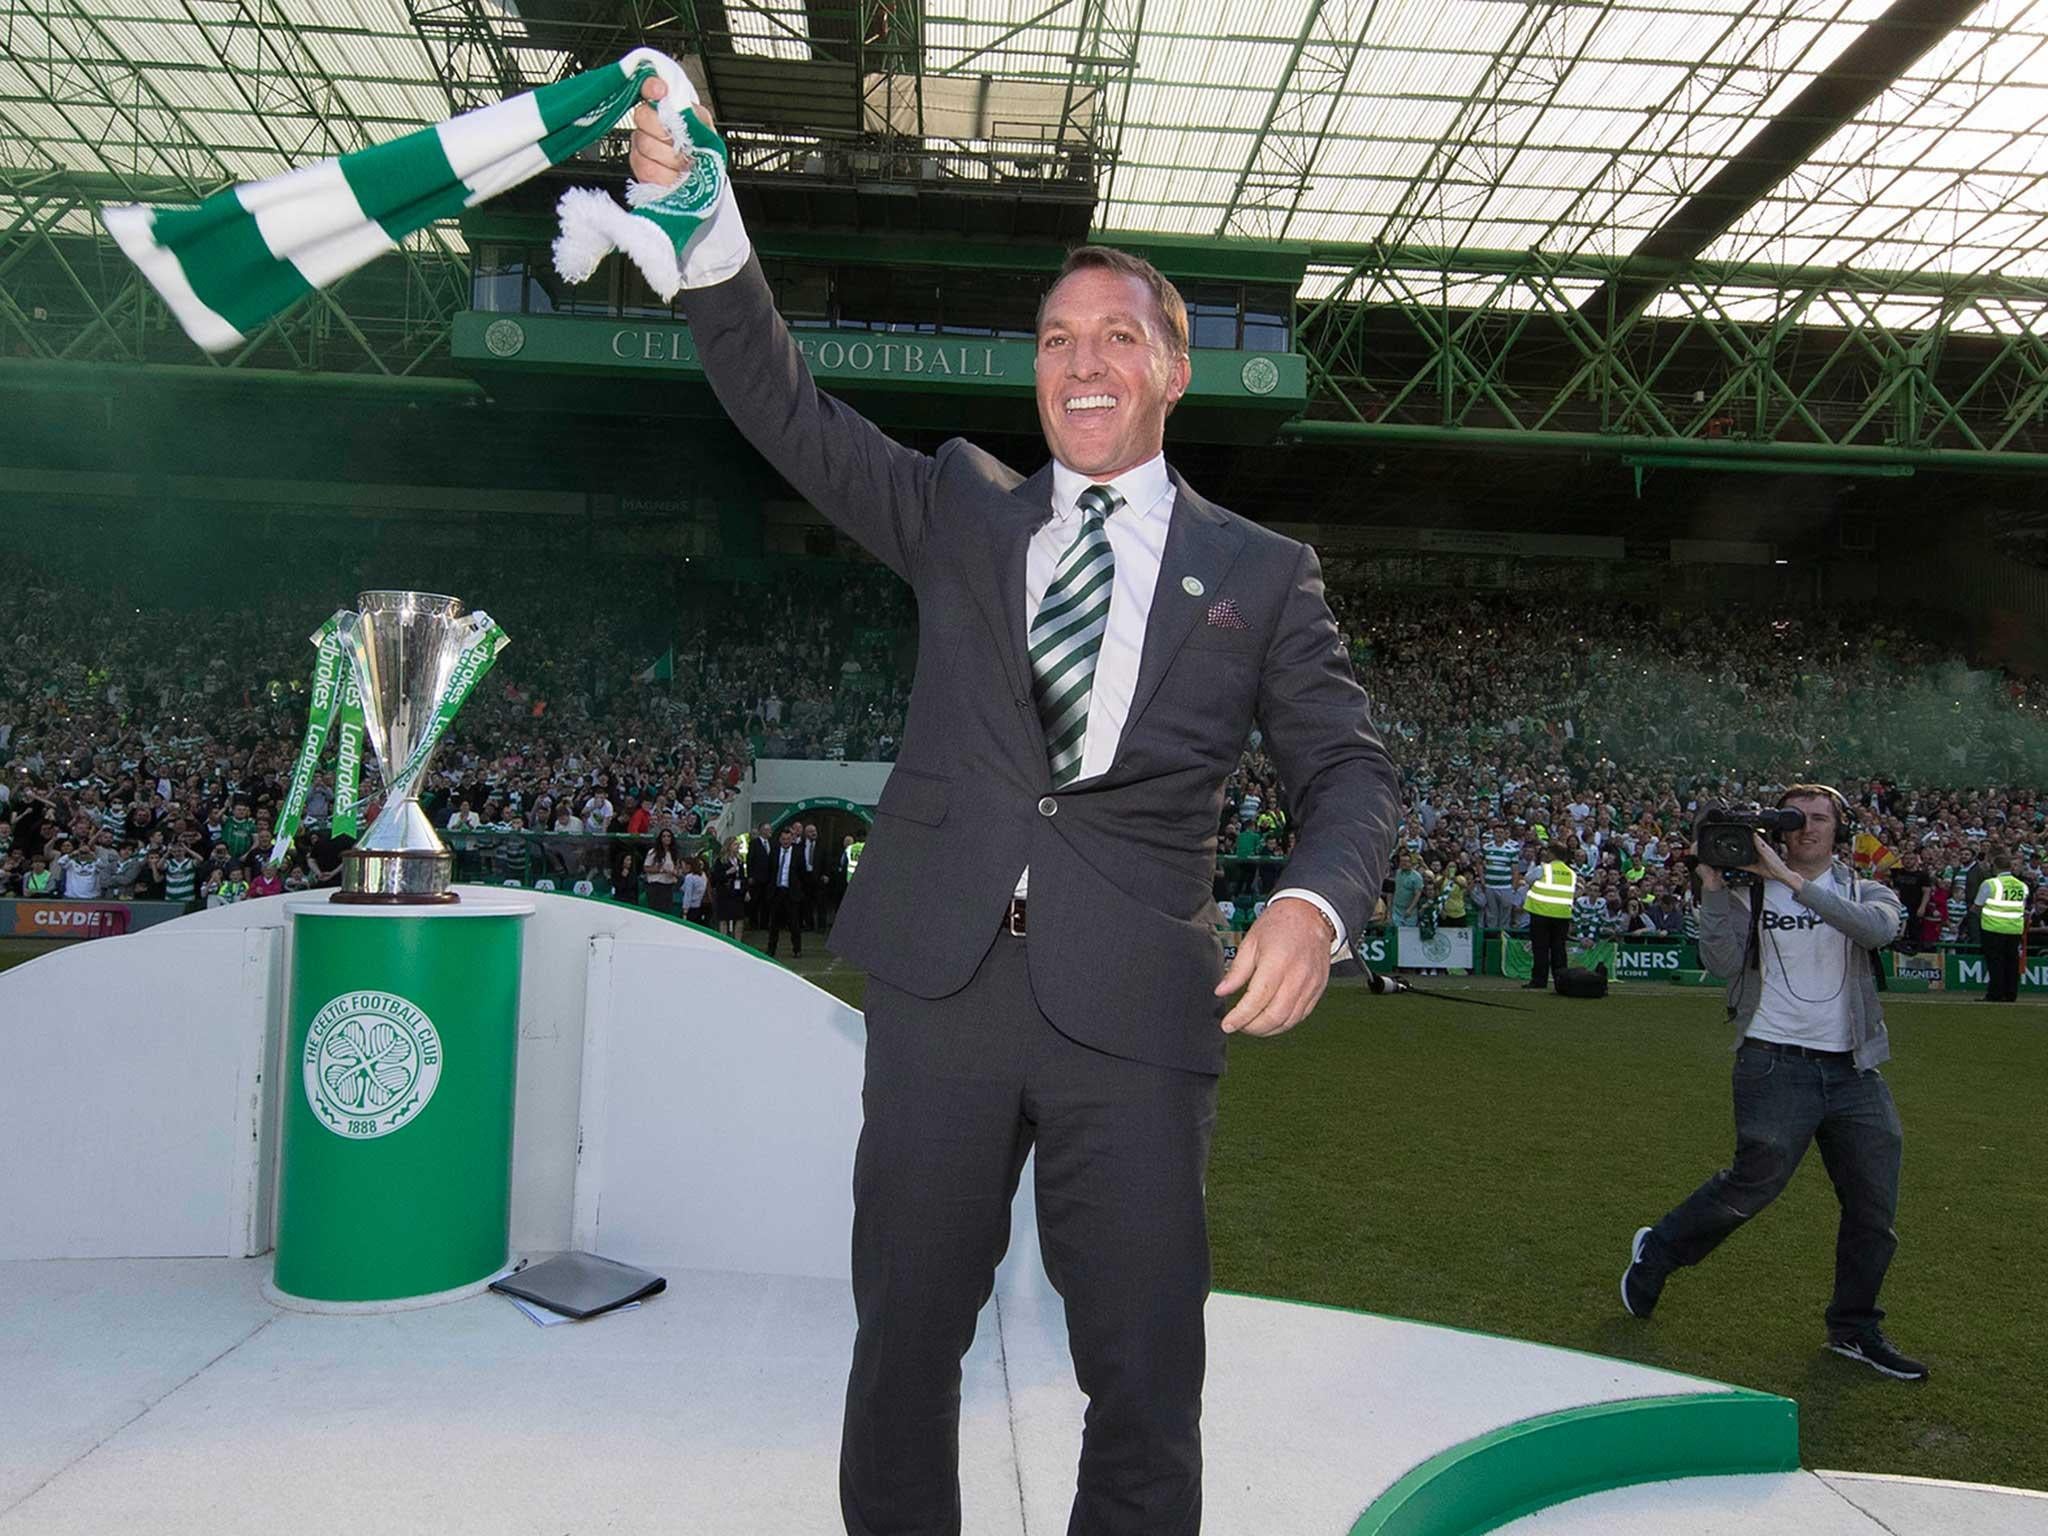 &#13;
Brendan Rodgers is unveiled as the new Celtic manager &#13;